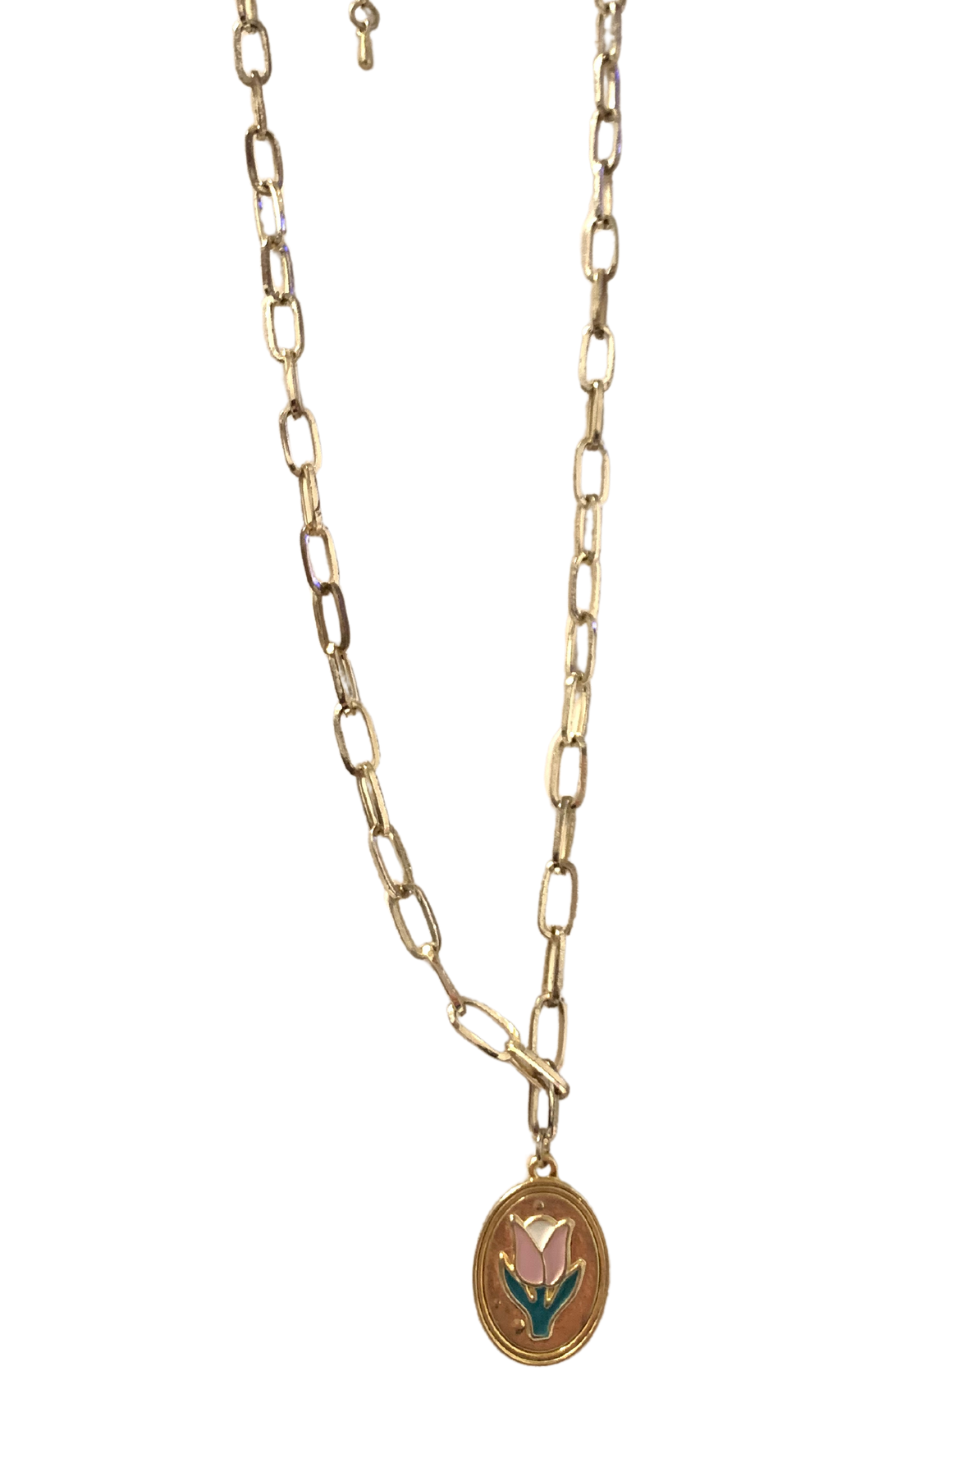 Gold Chain Necklace w/ Painted Floral Pendant